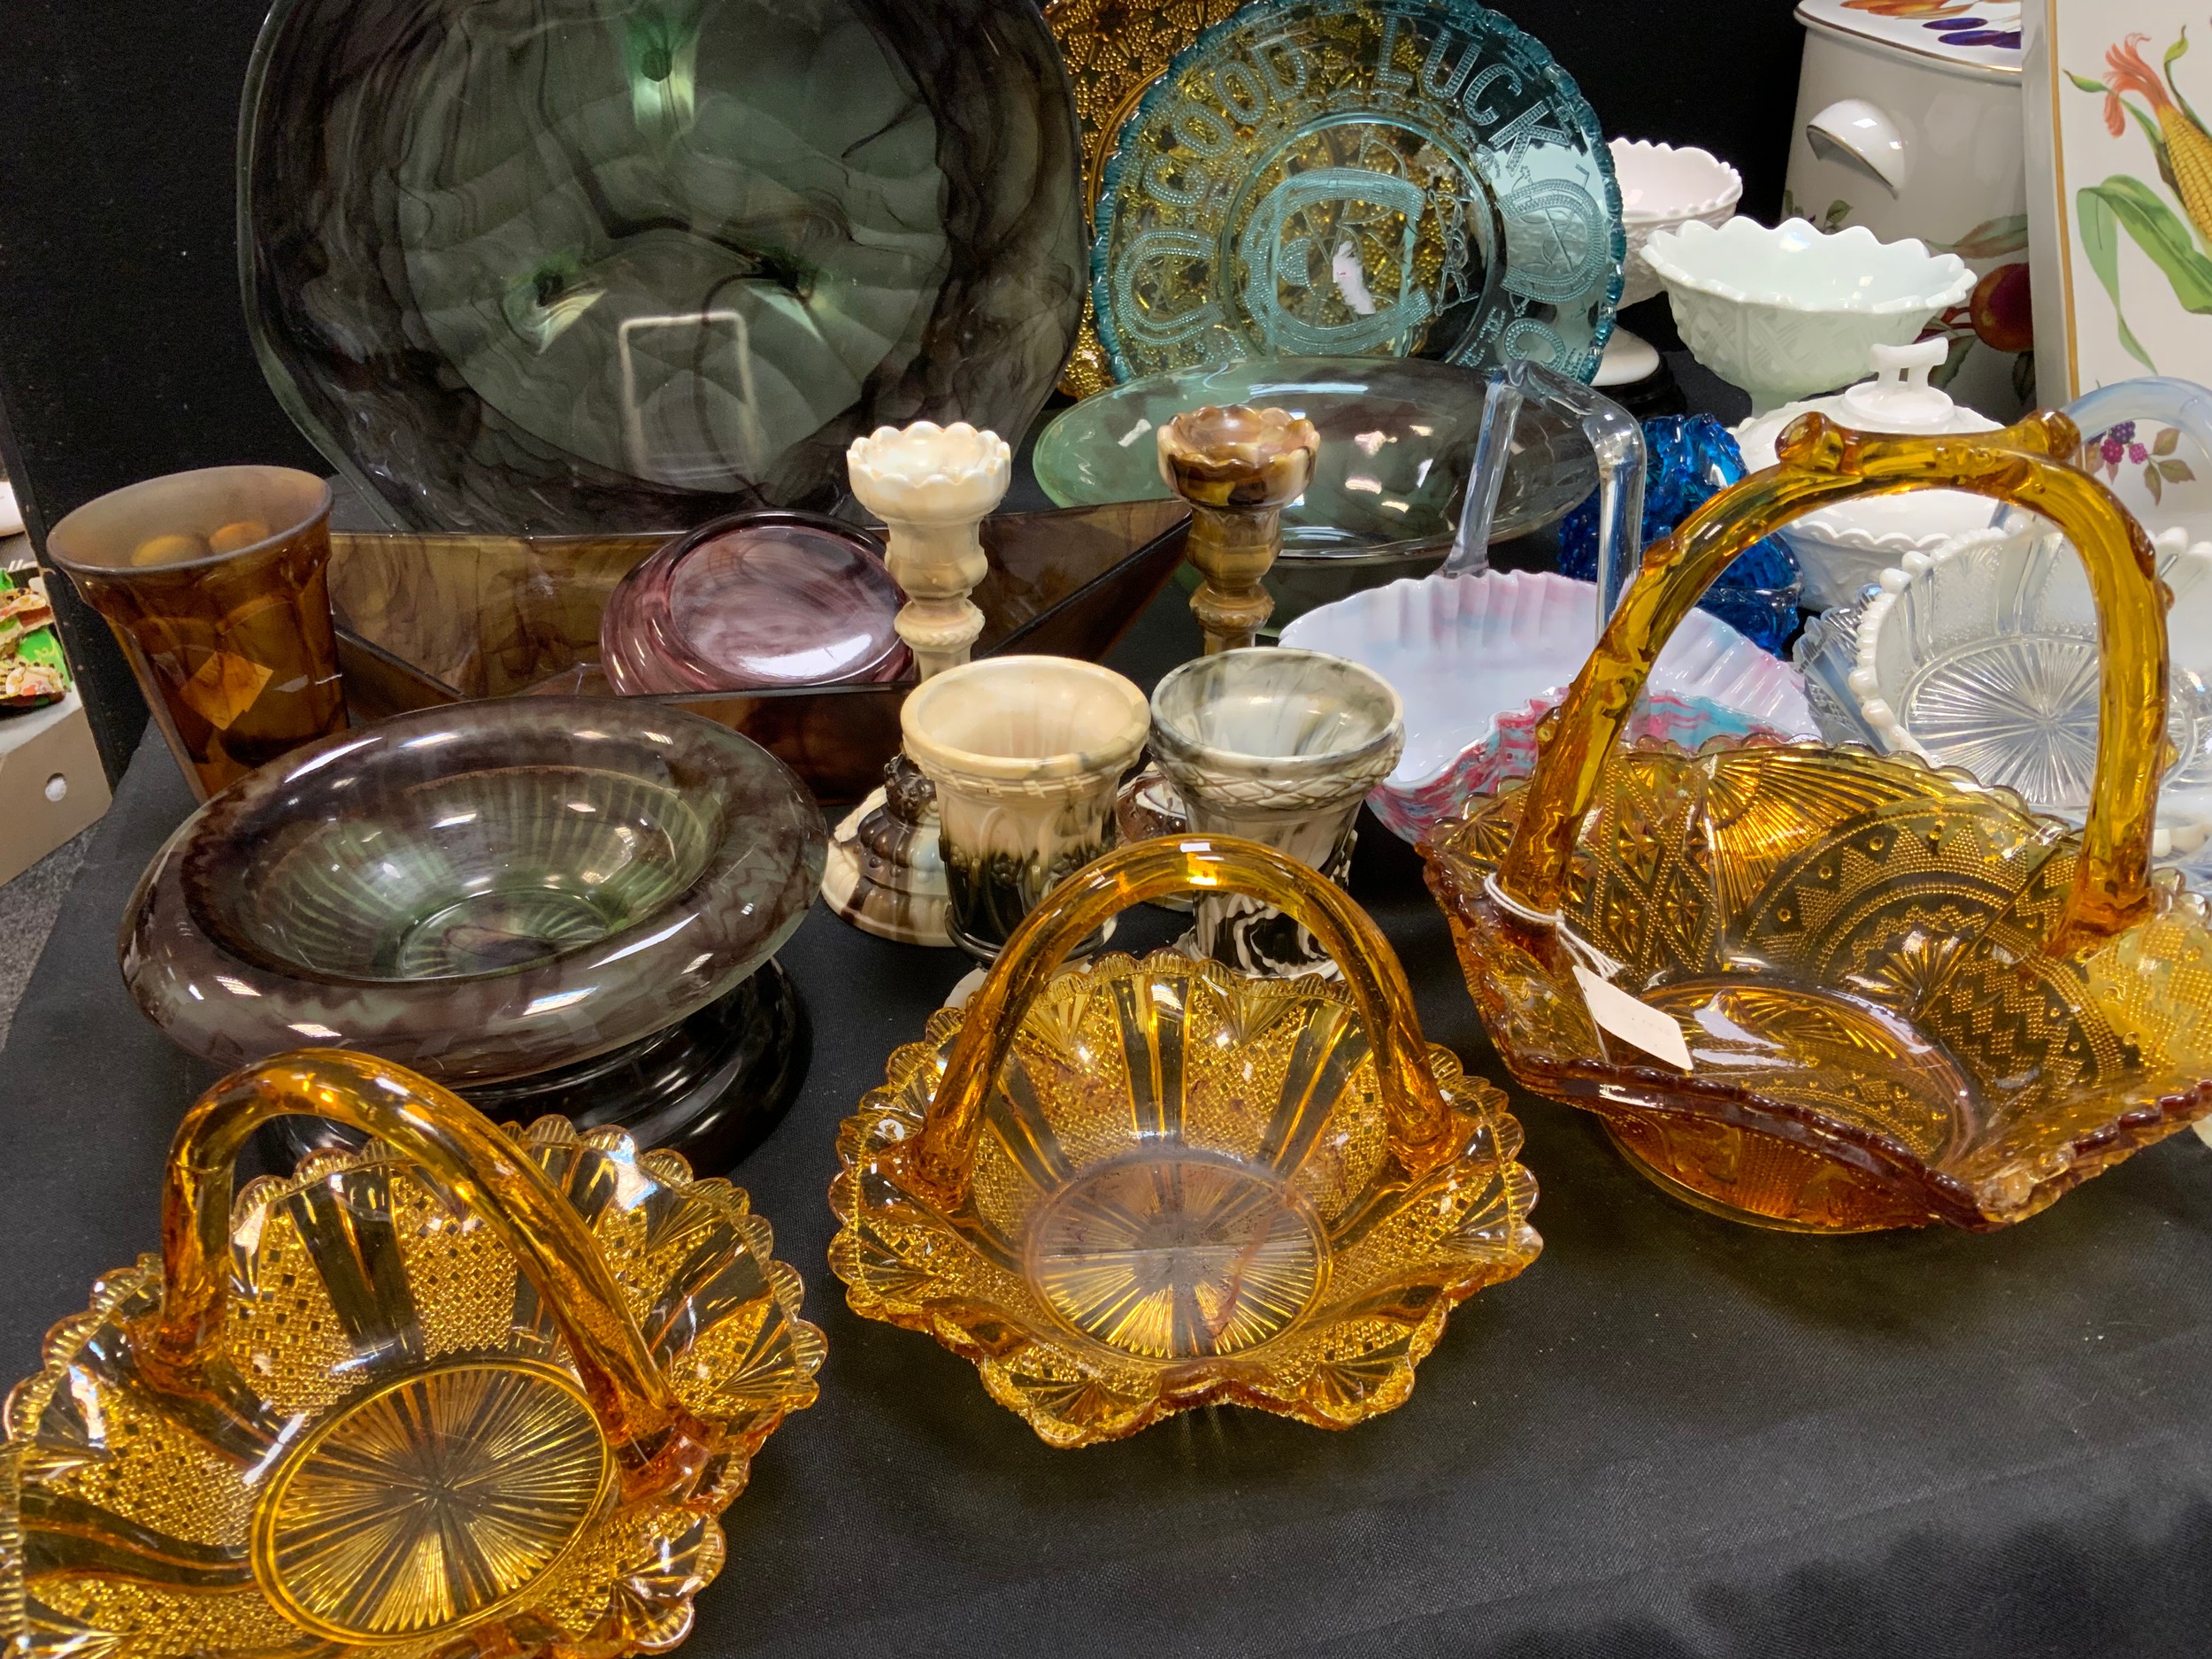 A Pair of Late 19th early 20th century 'Marbled' Pressed-Glass tripod bowls, each of the wide, - Image 2 of 3